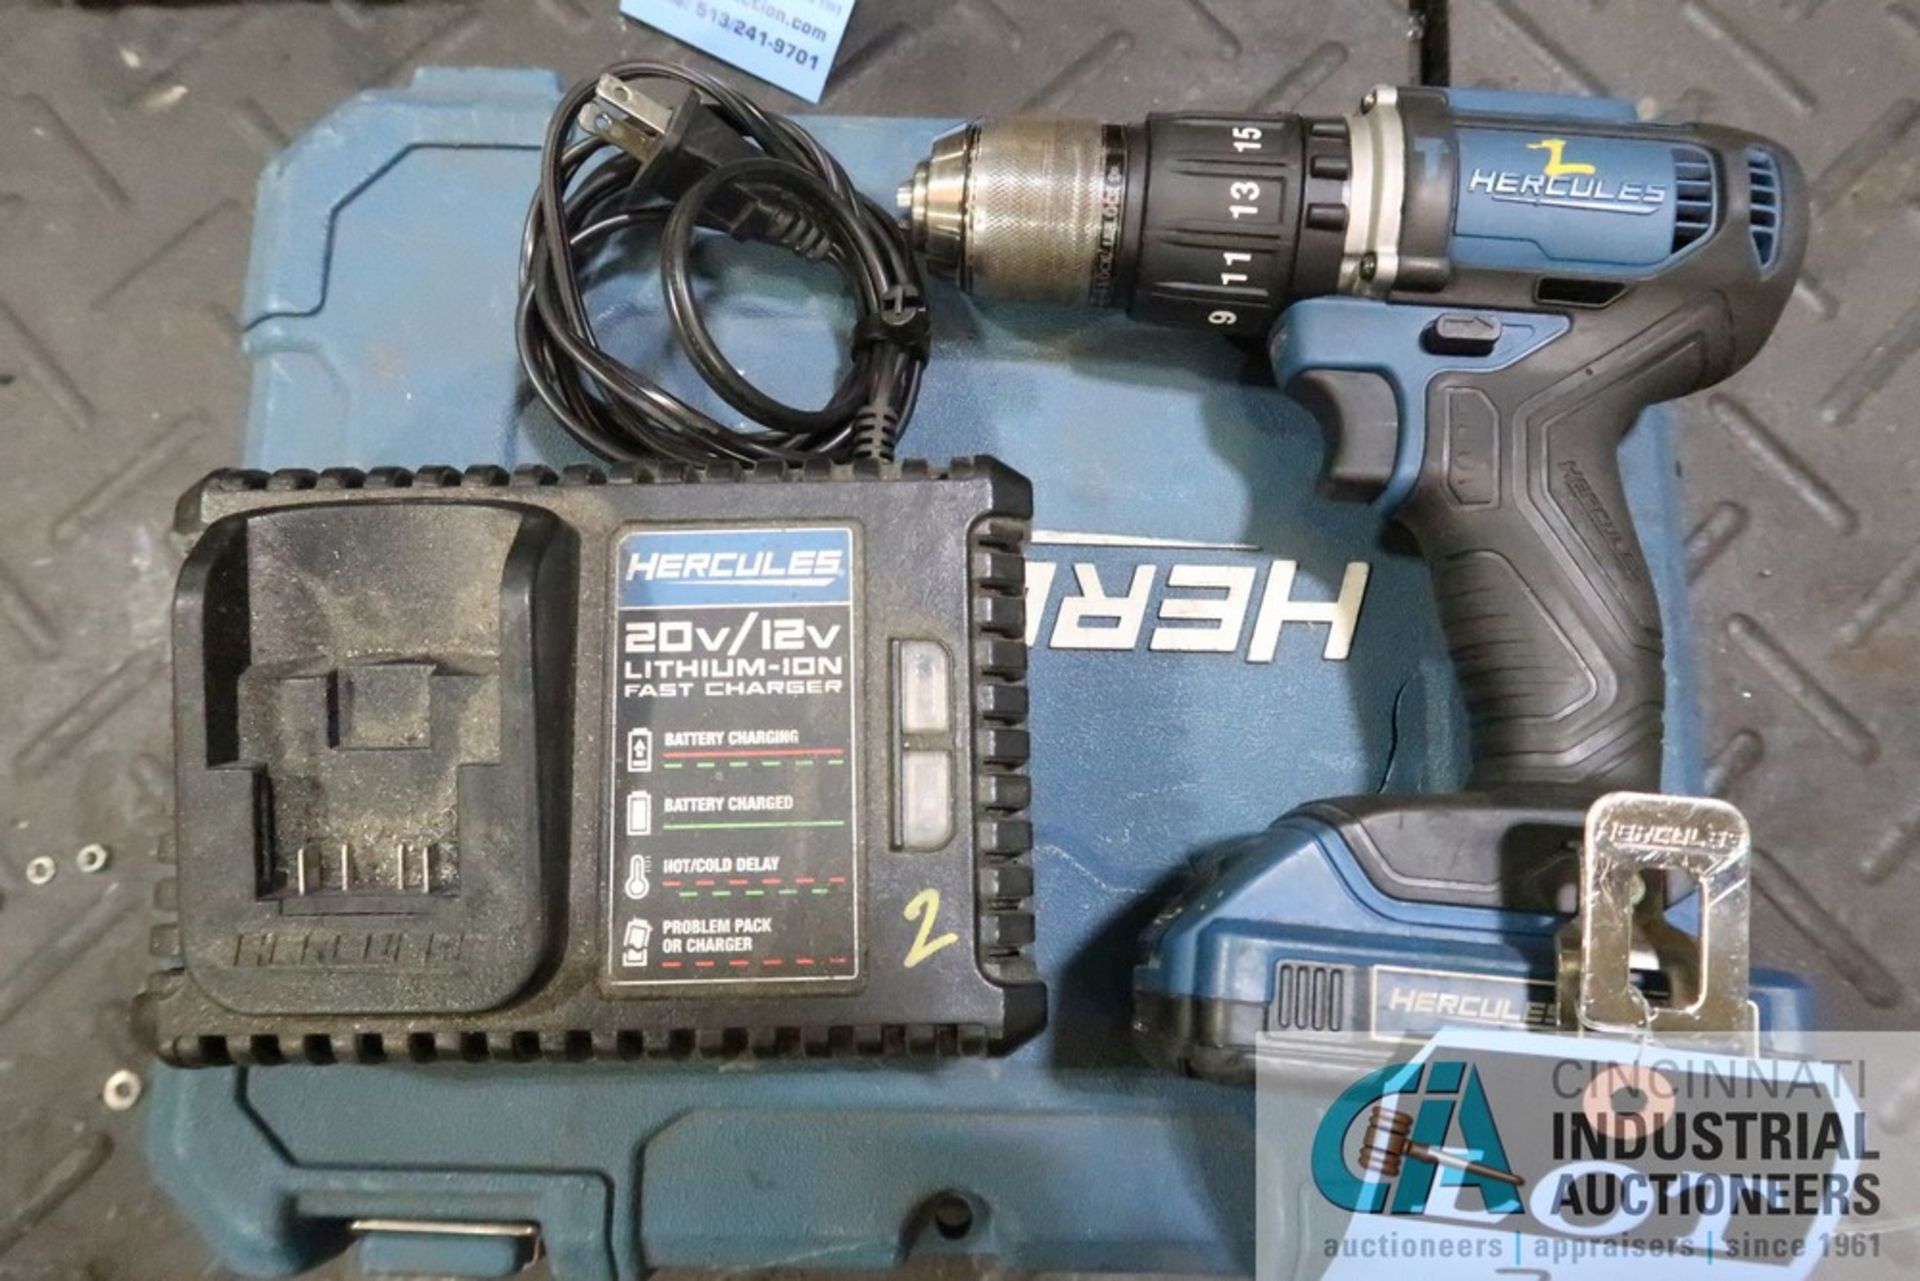 20 VOLT HERCULES CORDLESS DRILL WITH CHARGER - Image 2 of 2